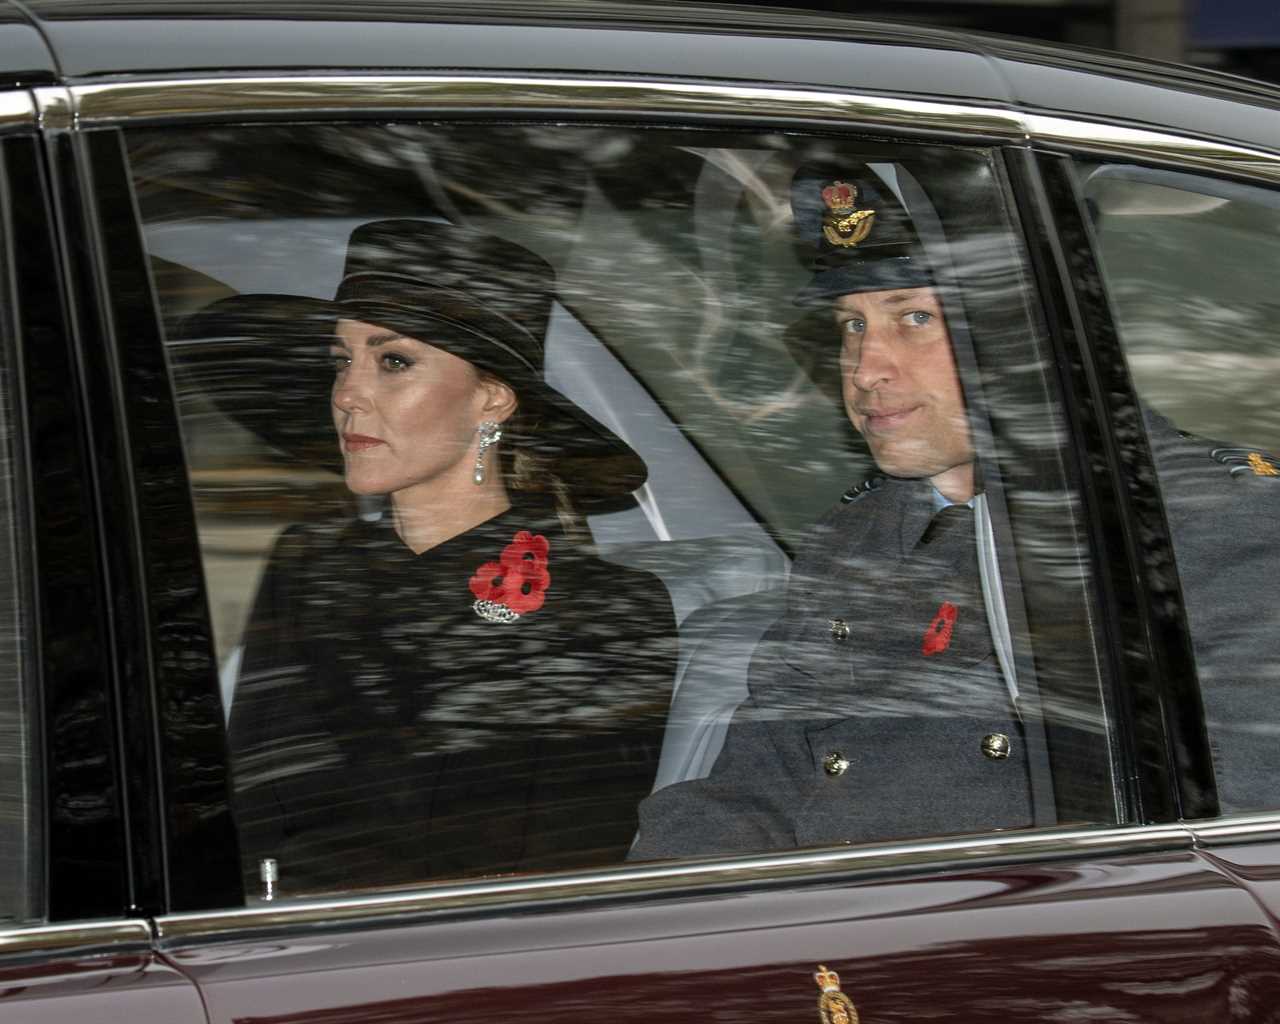 Prince William & Kate Middleton arrive at Remembrance Sunday service with King Charles to lead first ceremony as monarch